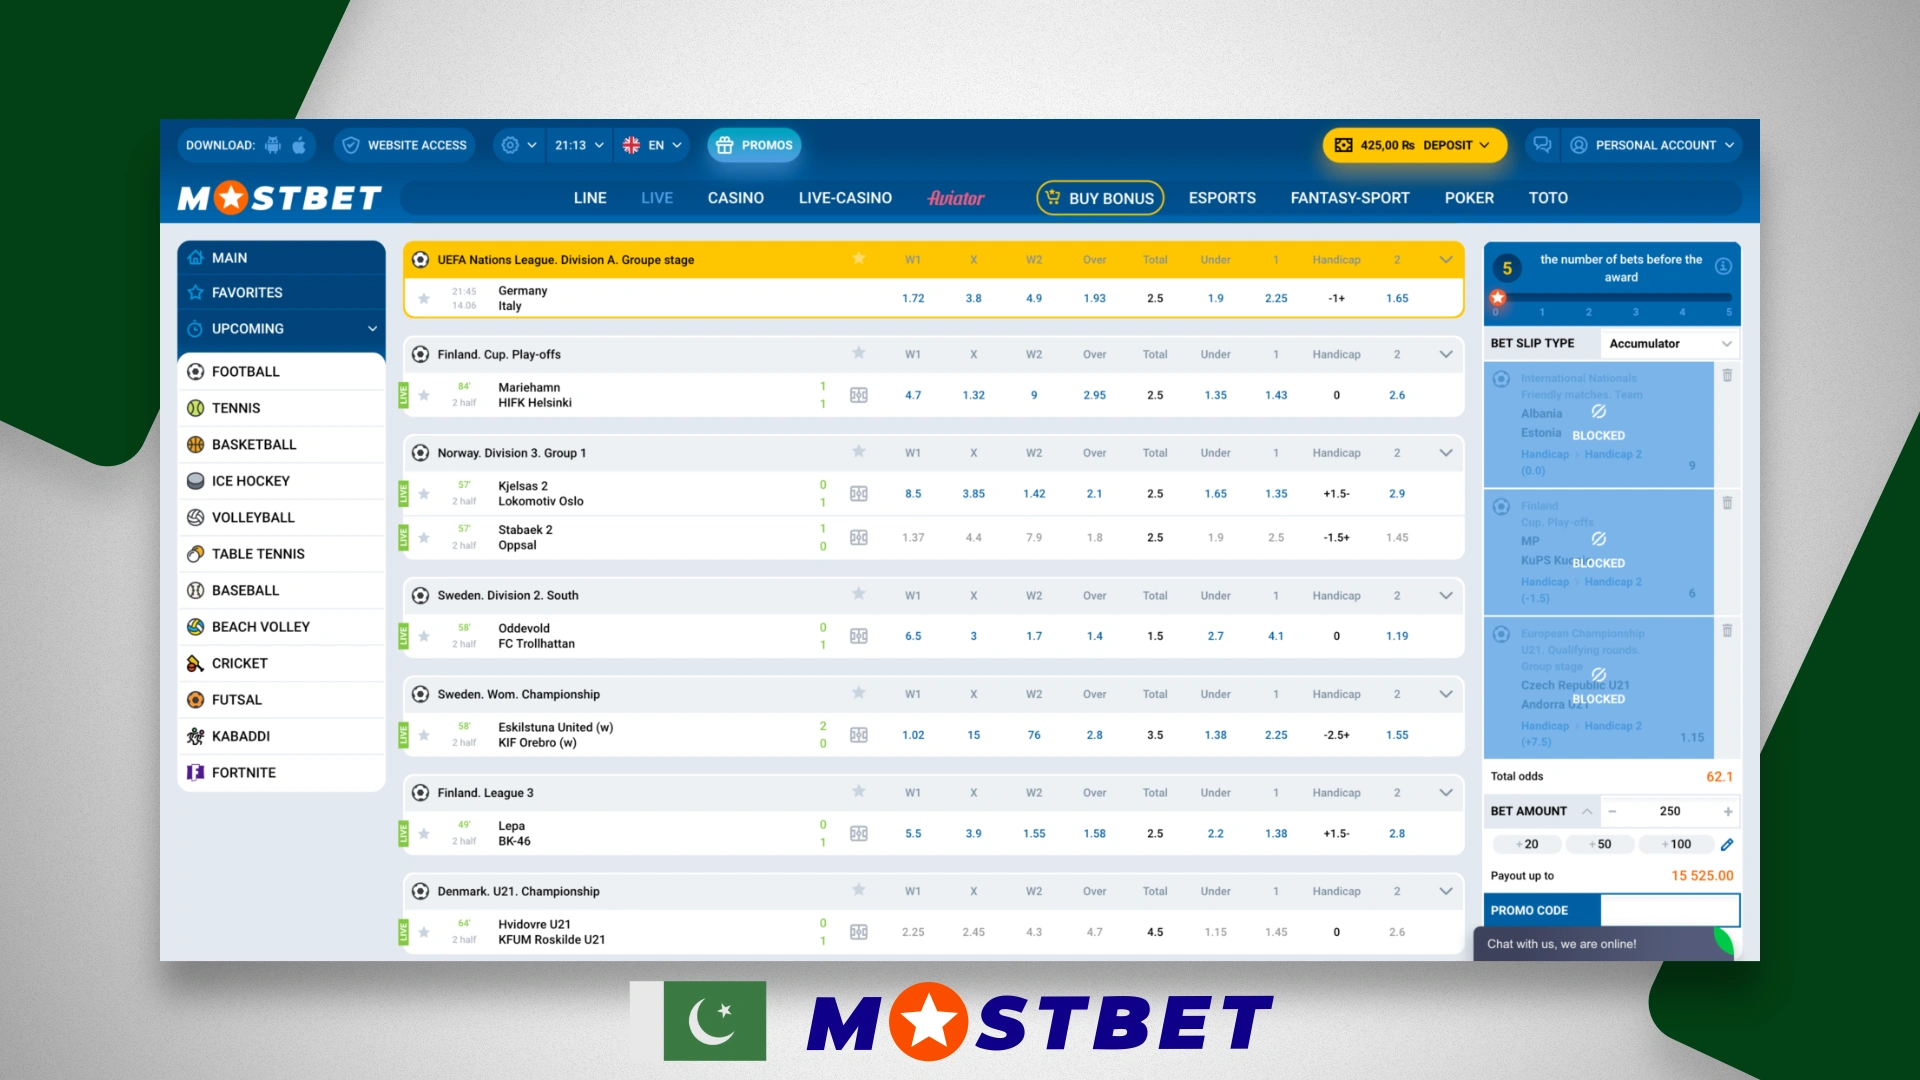 Example of blocked bets on Mostbet